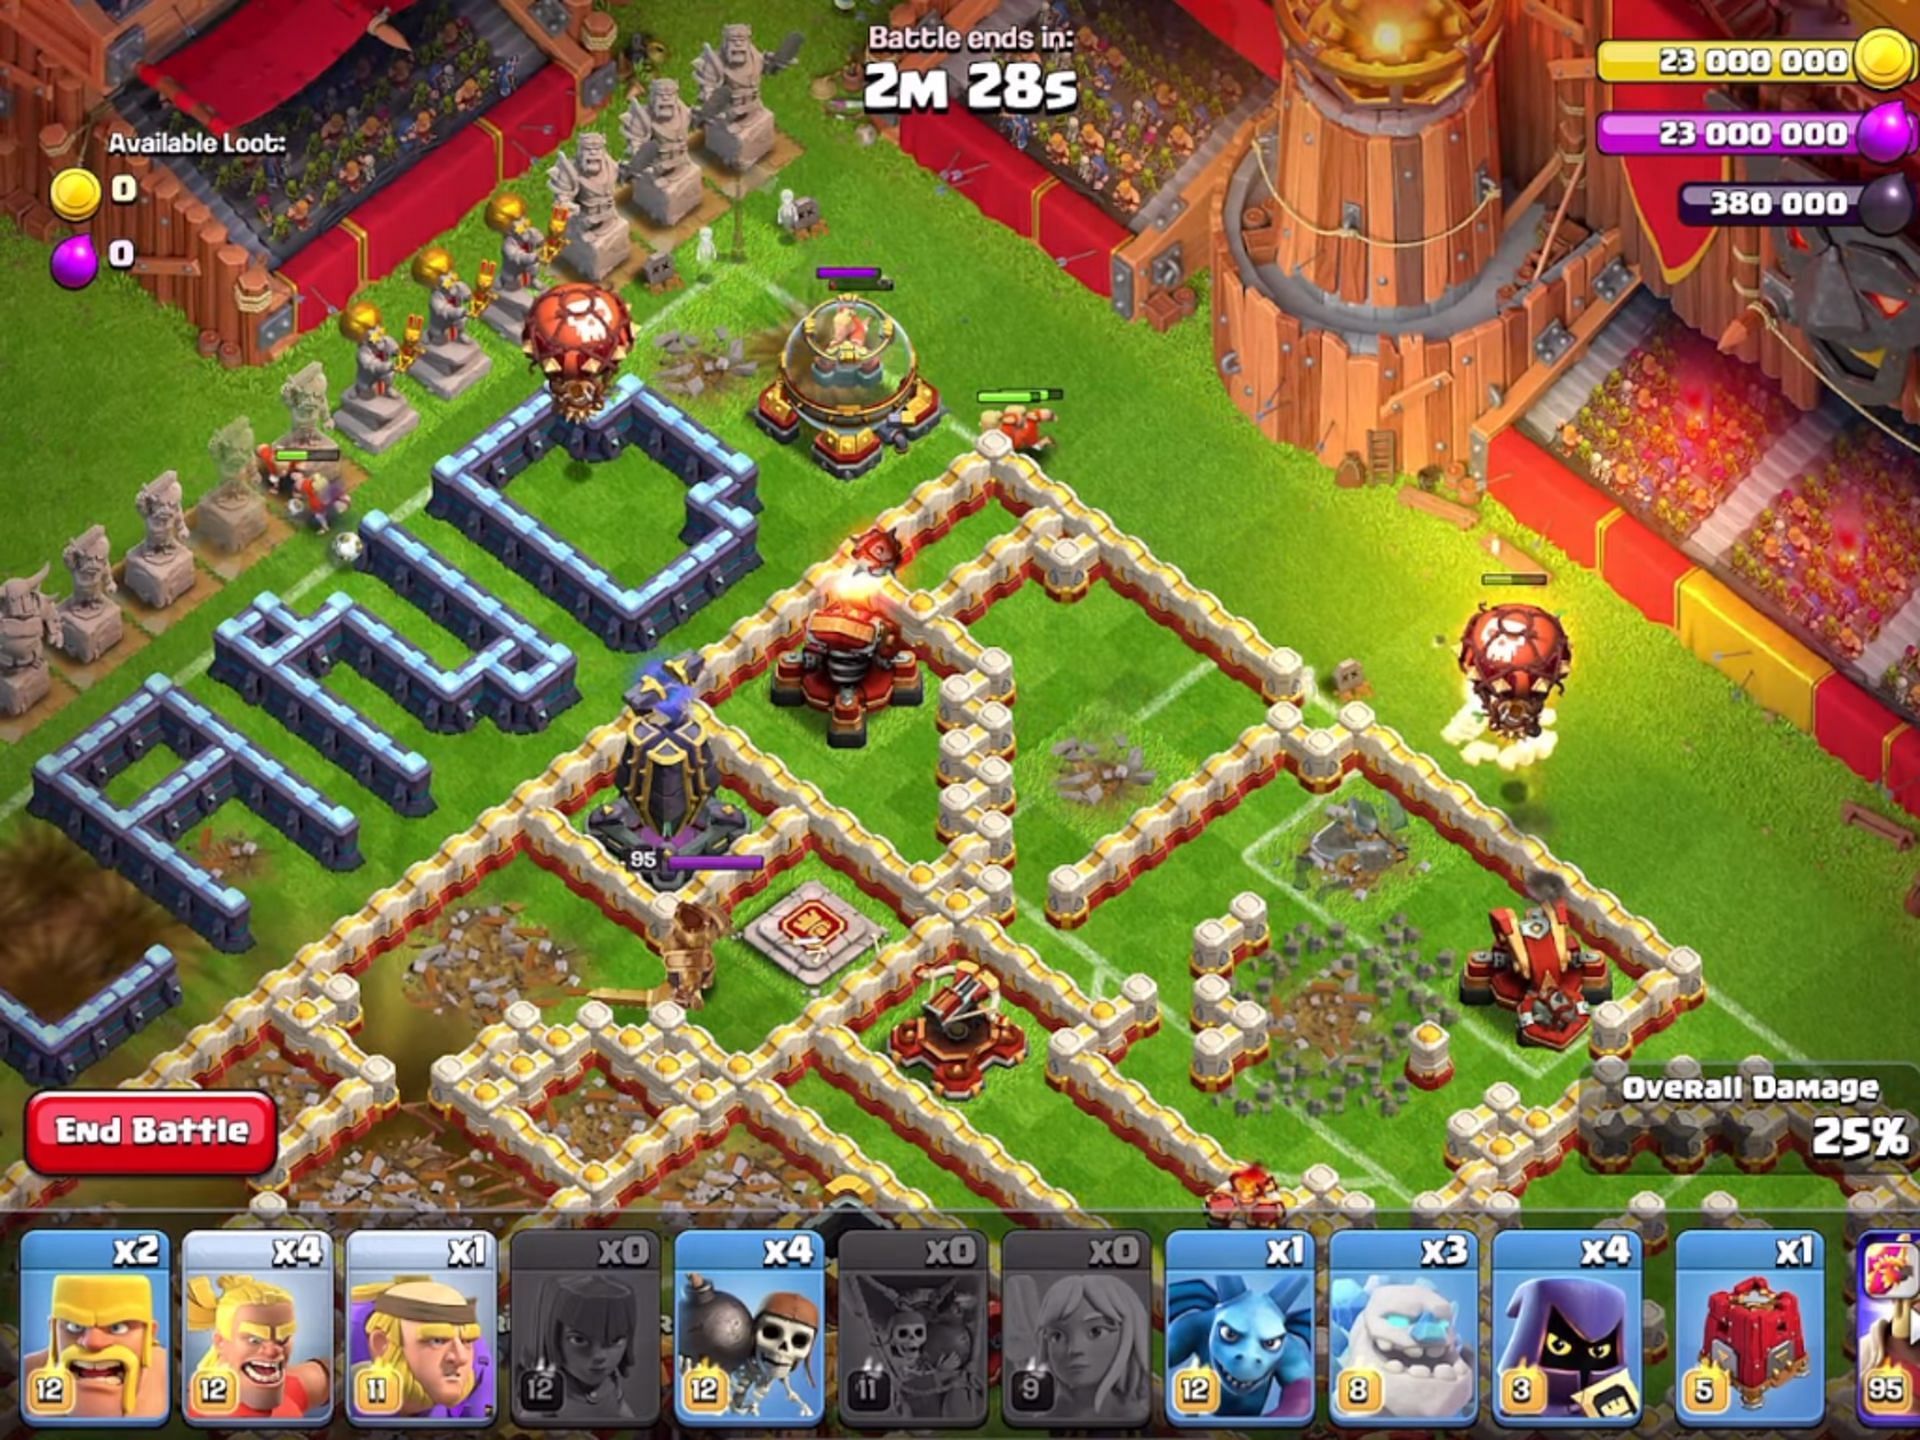 Fireball usage in Clash of Clans Impossible Final Haaland Challenge (Image via Supercell)